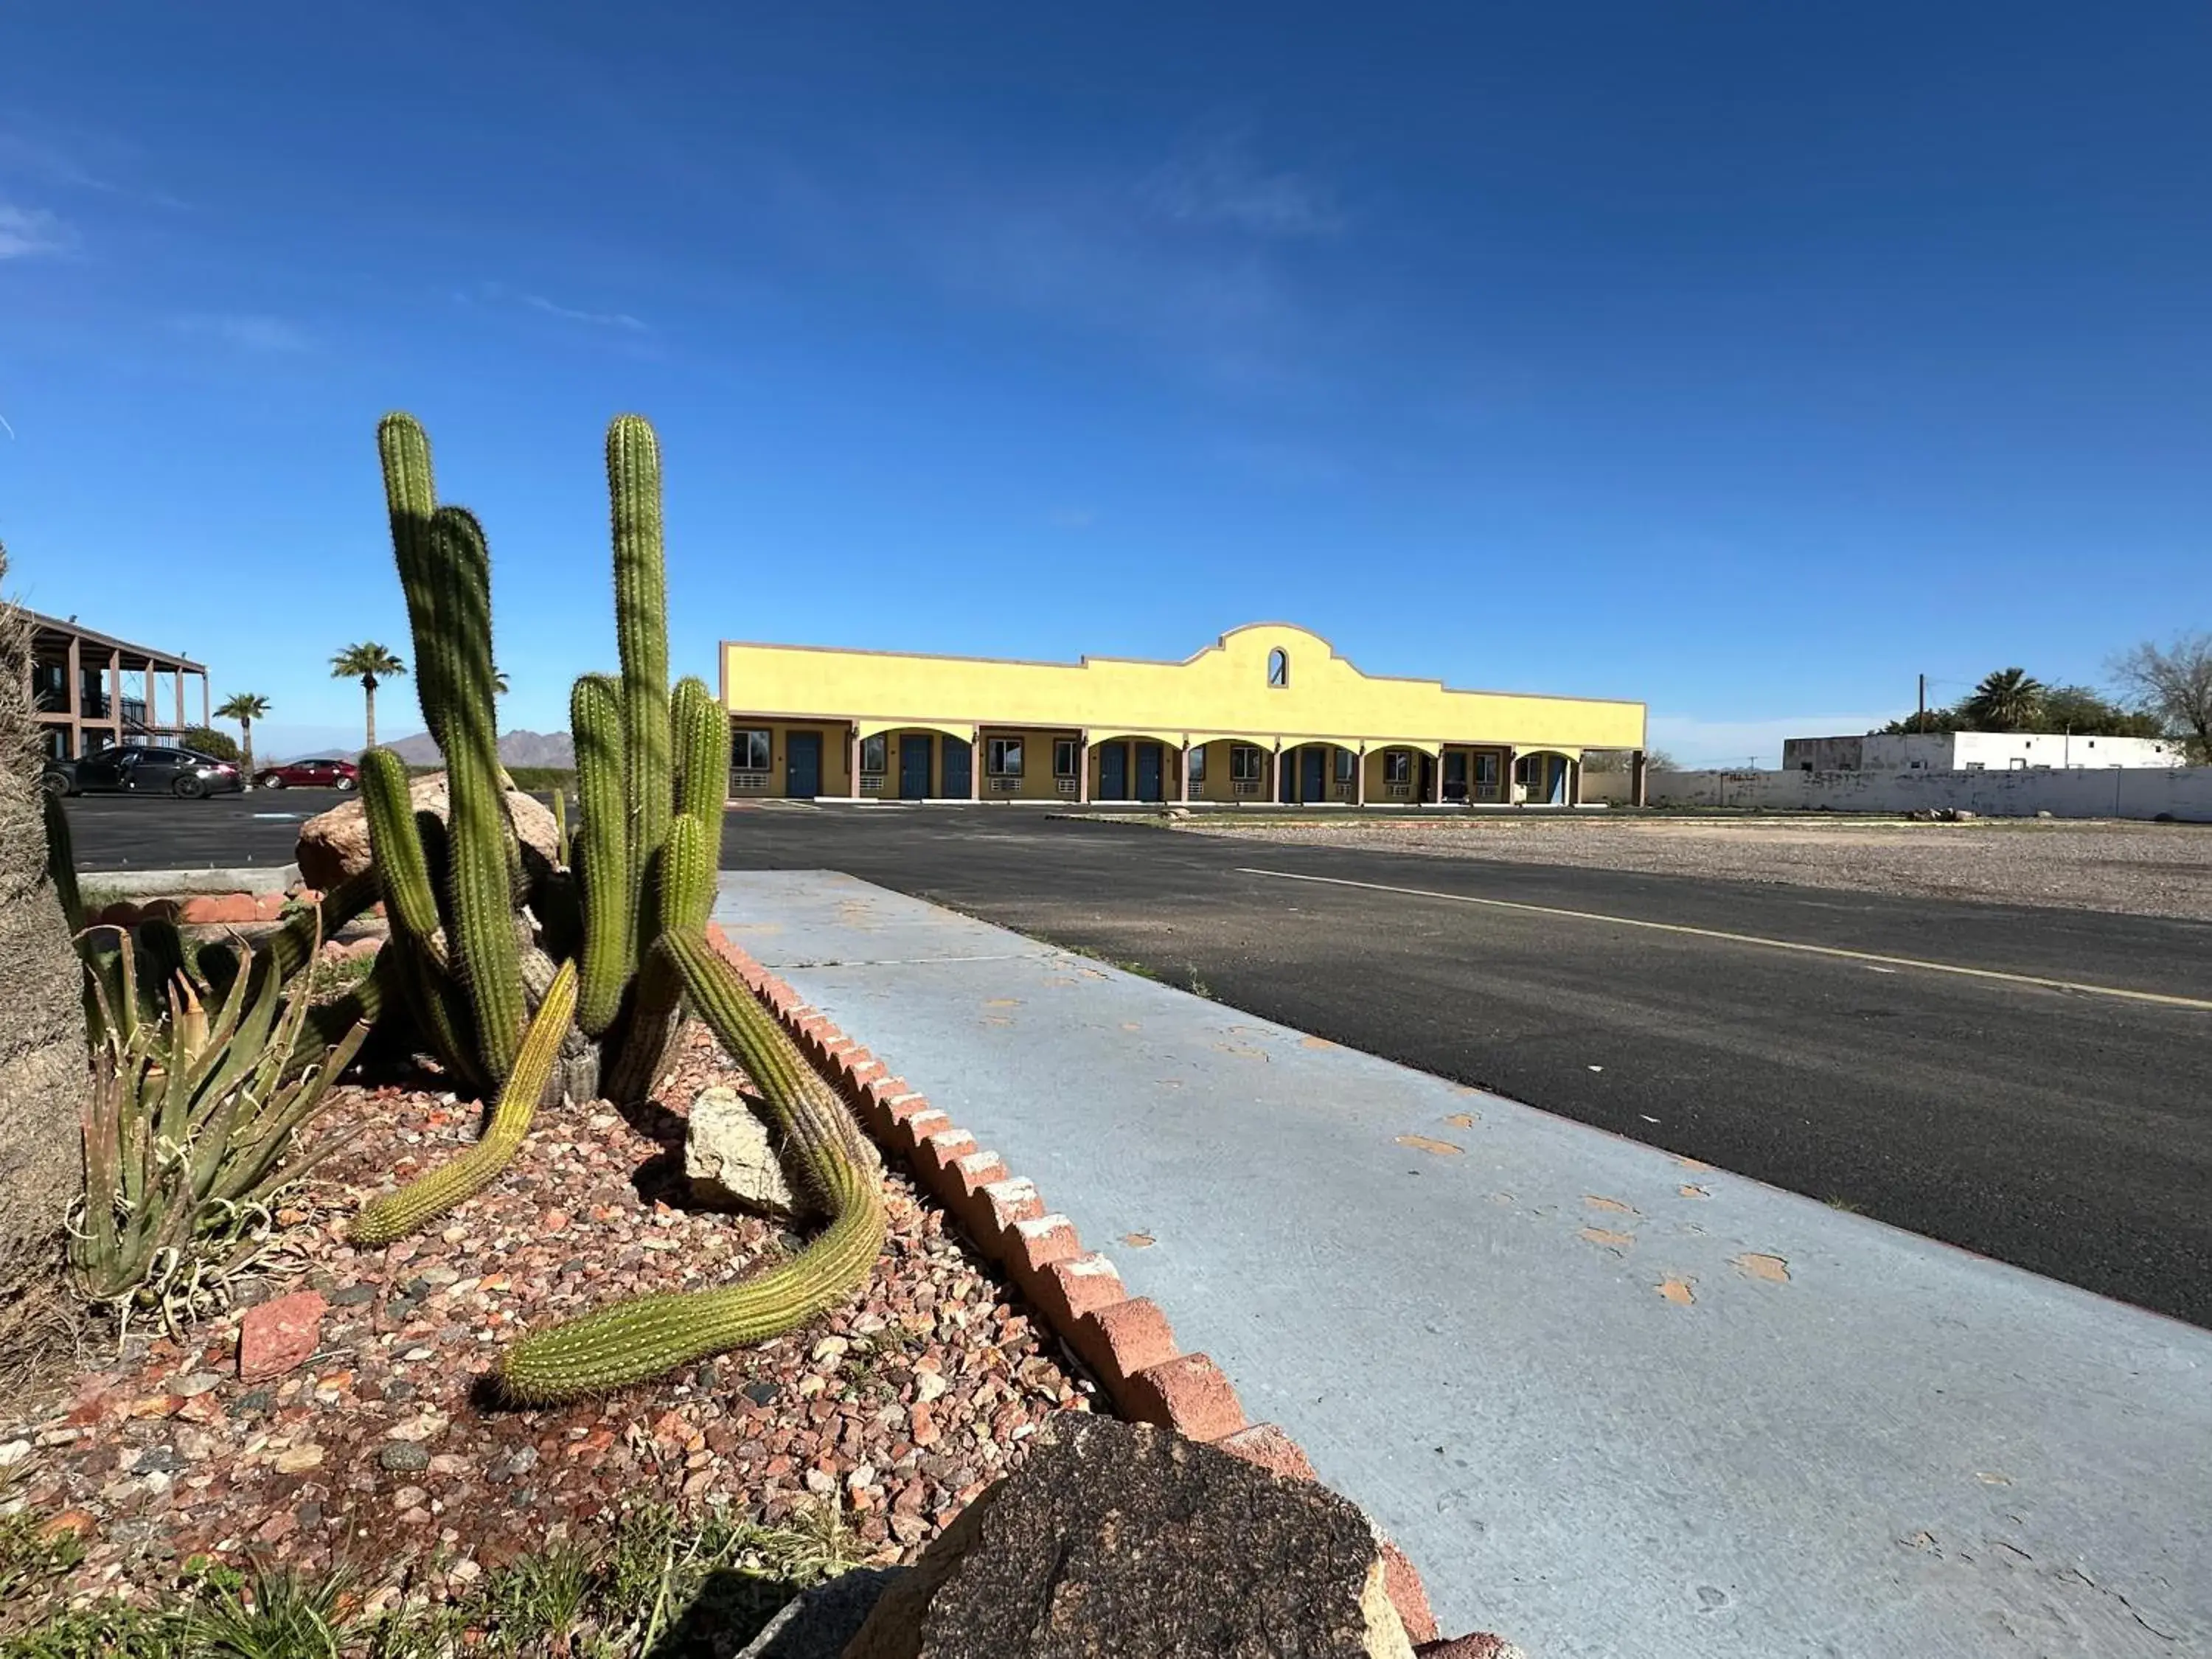 Property building in Gila Bend Lodge